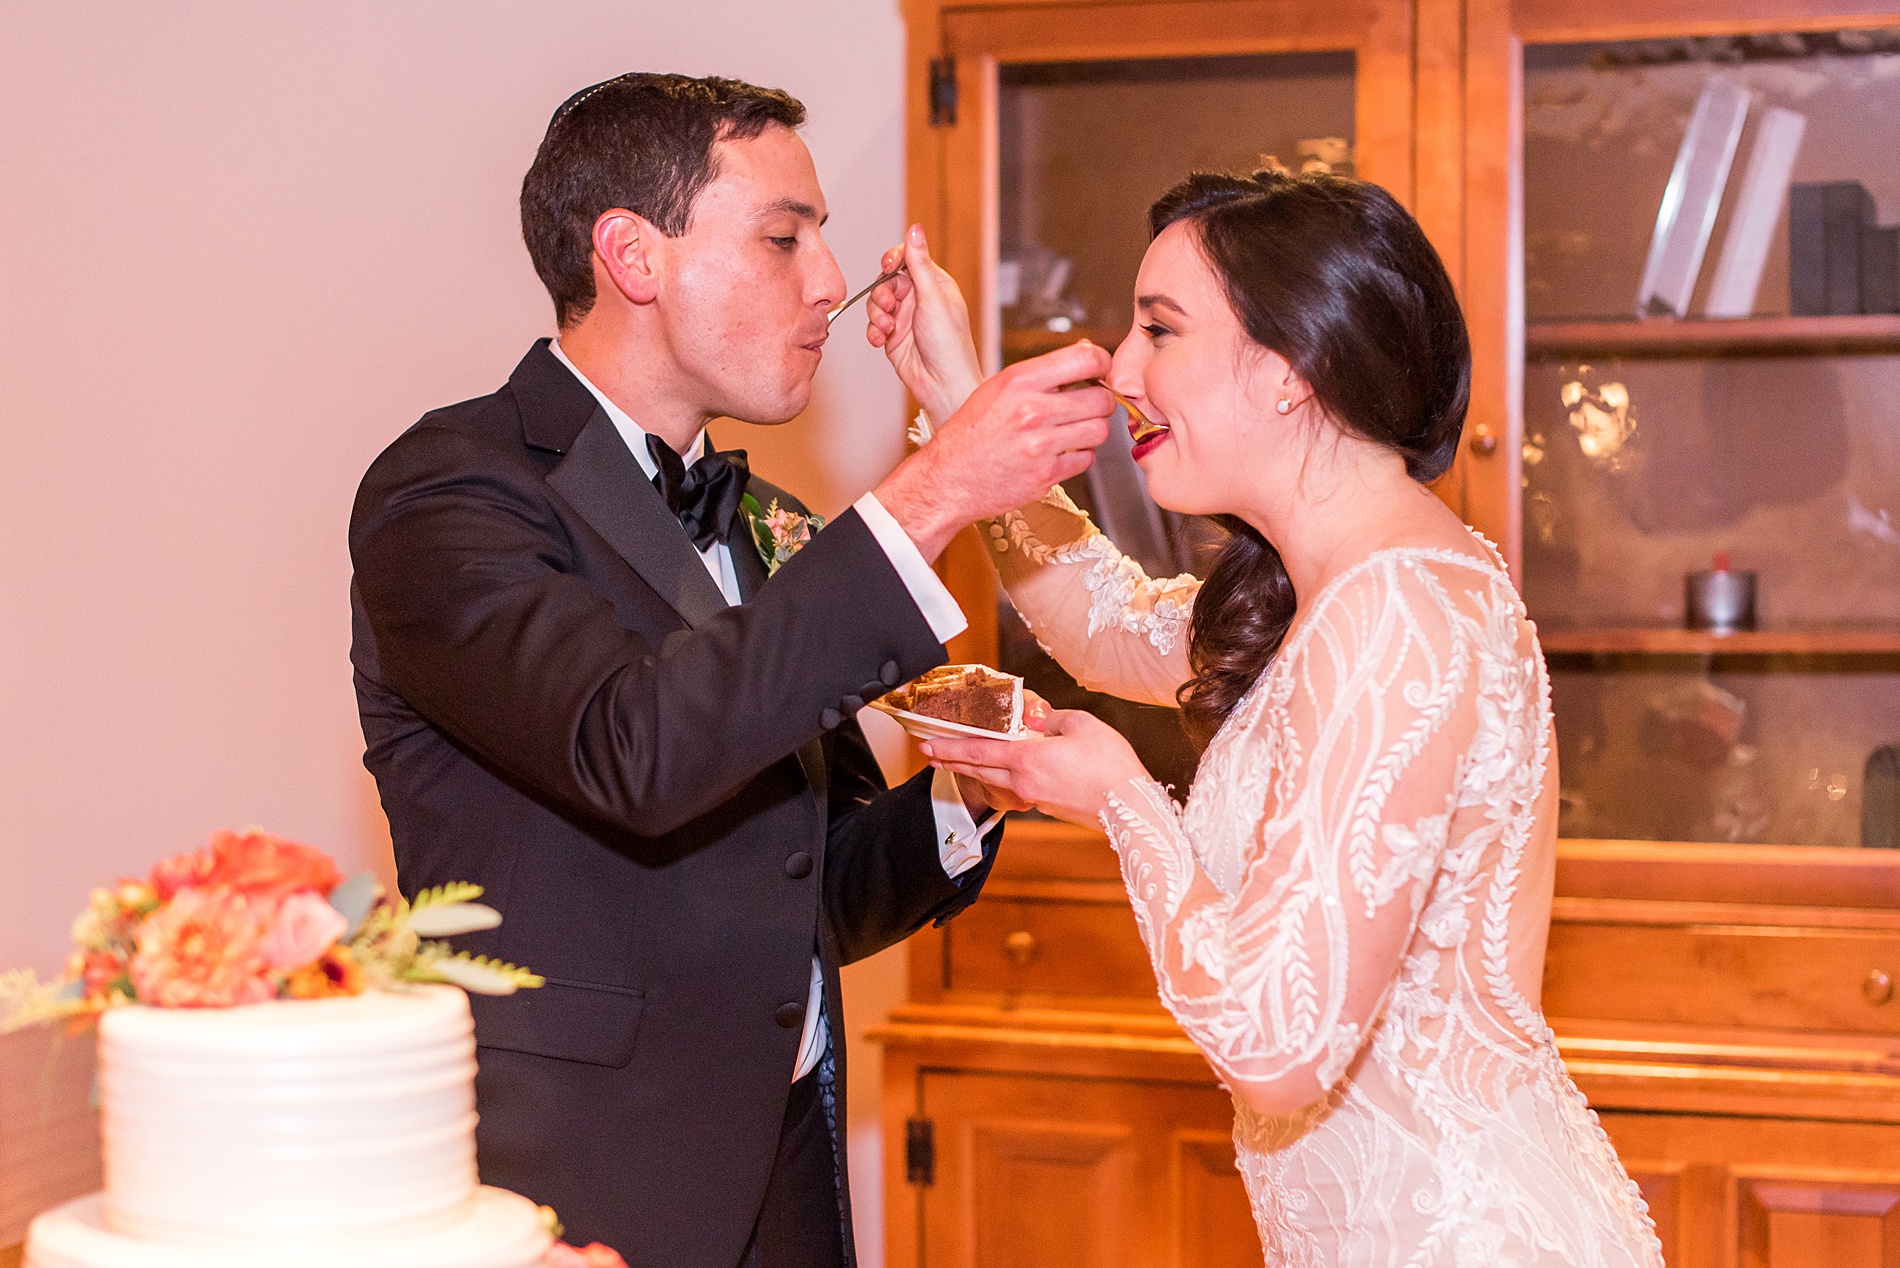 newlyweds feed each other their wedding cake at MA wedding reception at the Warren Conference Center